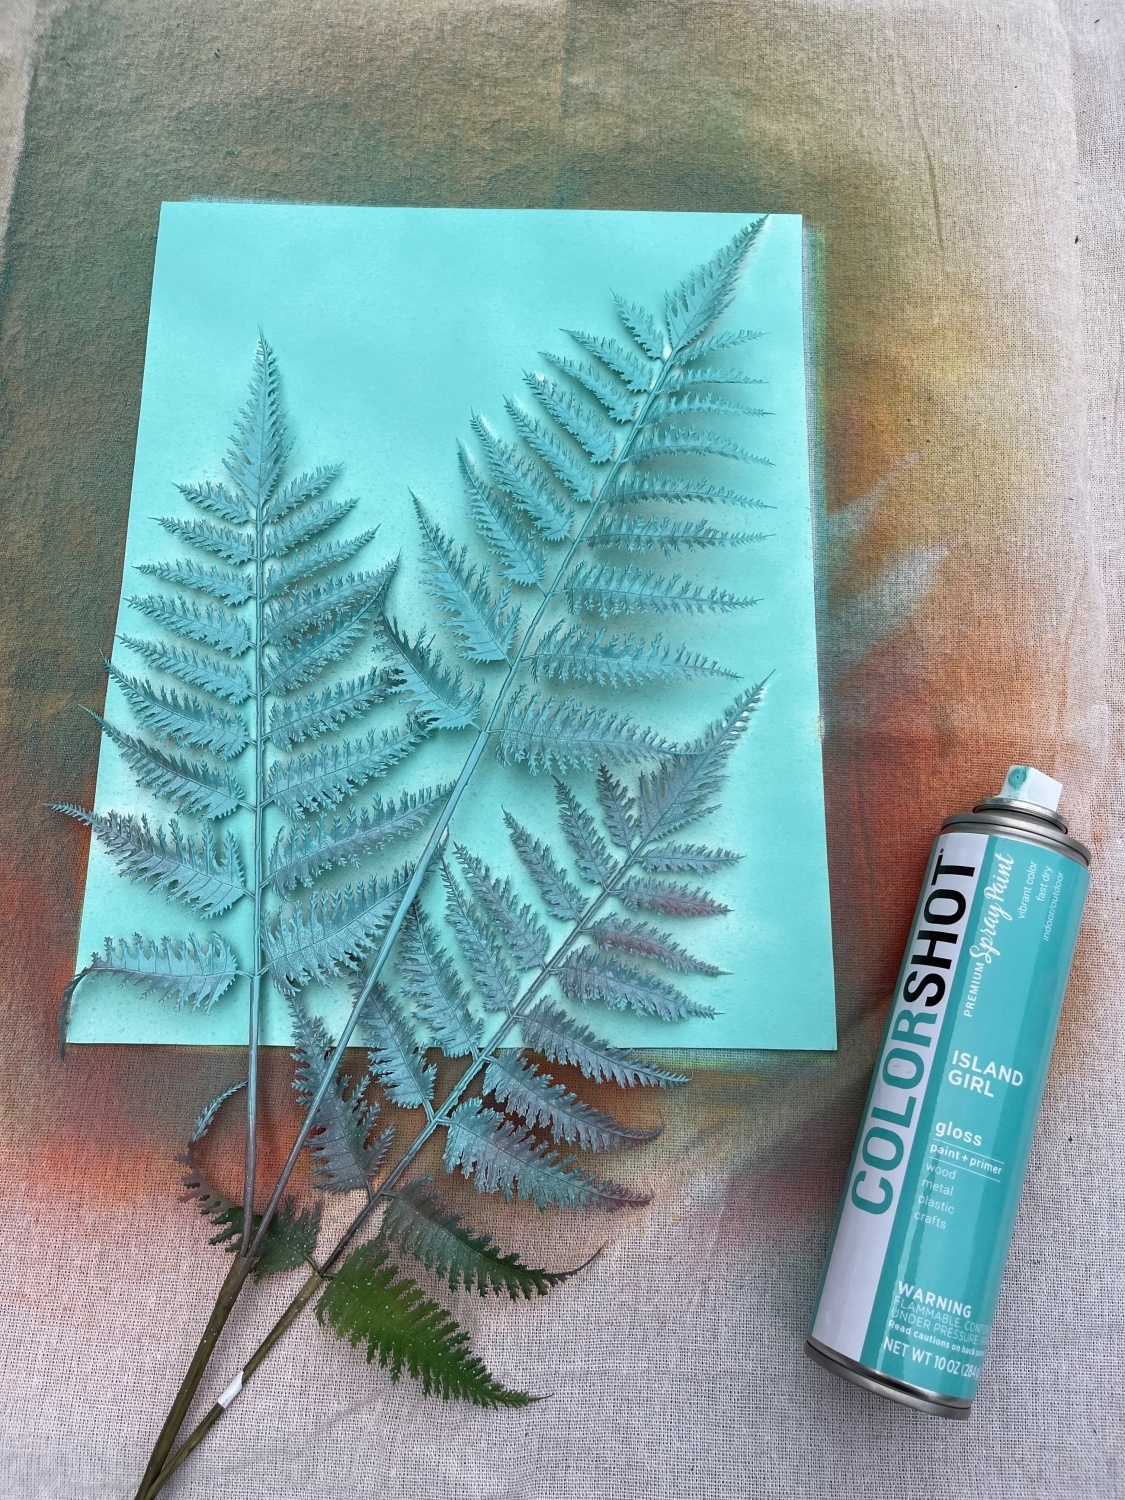 Arrange foliage onto paper and apply spray paint